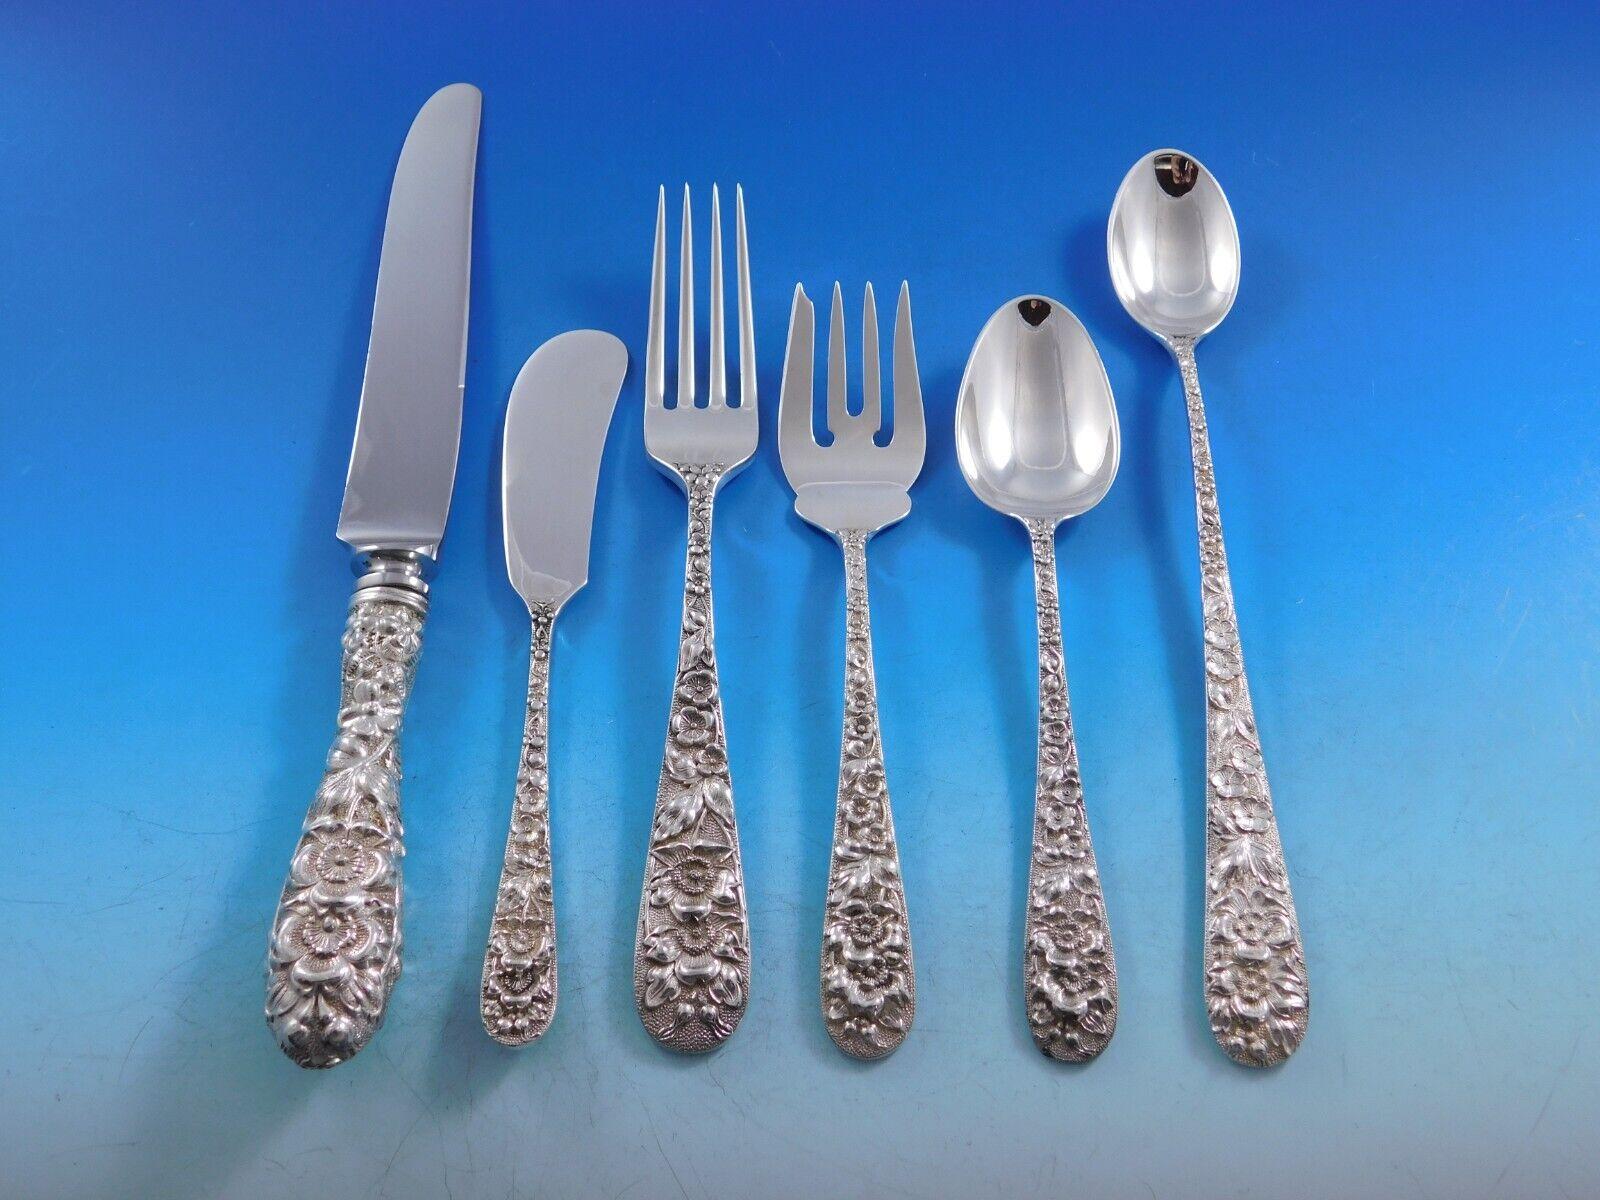 Gorgeous Forget Me Not by Stieff (Baltimore, MD) sterling silver Flatware set - 56 pieces. This set includes:


8 Knives w/French stainless blades, 9